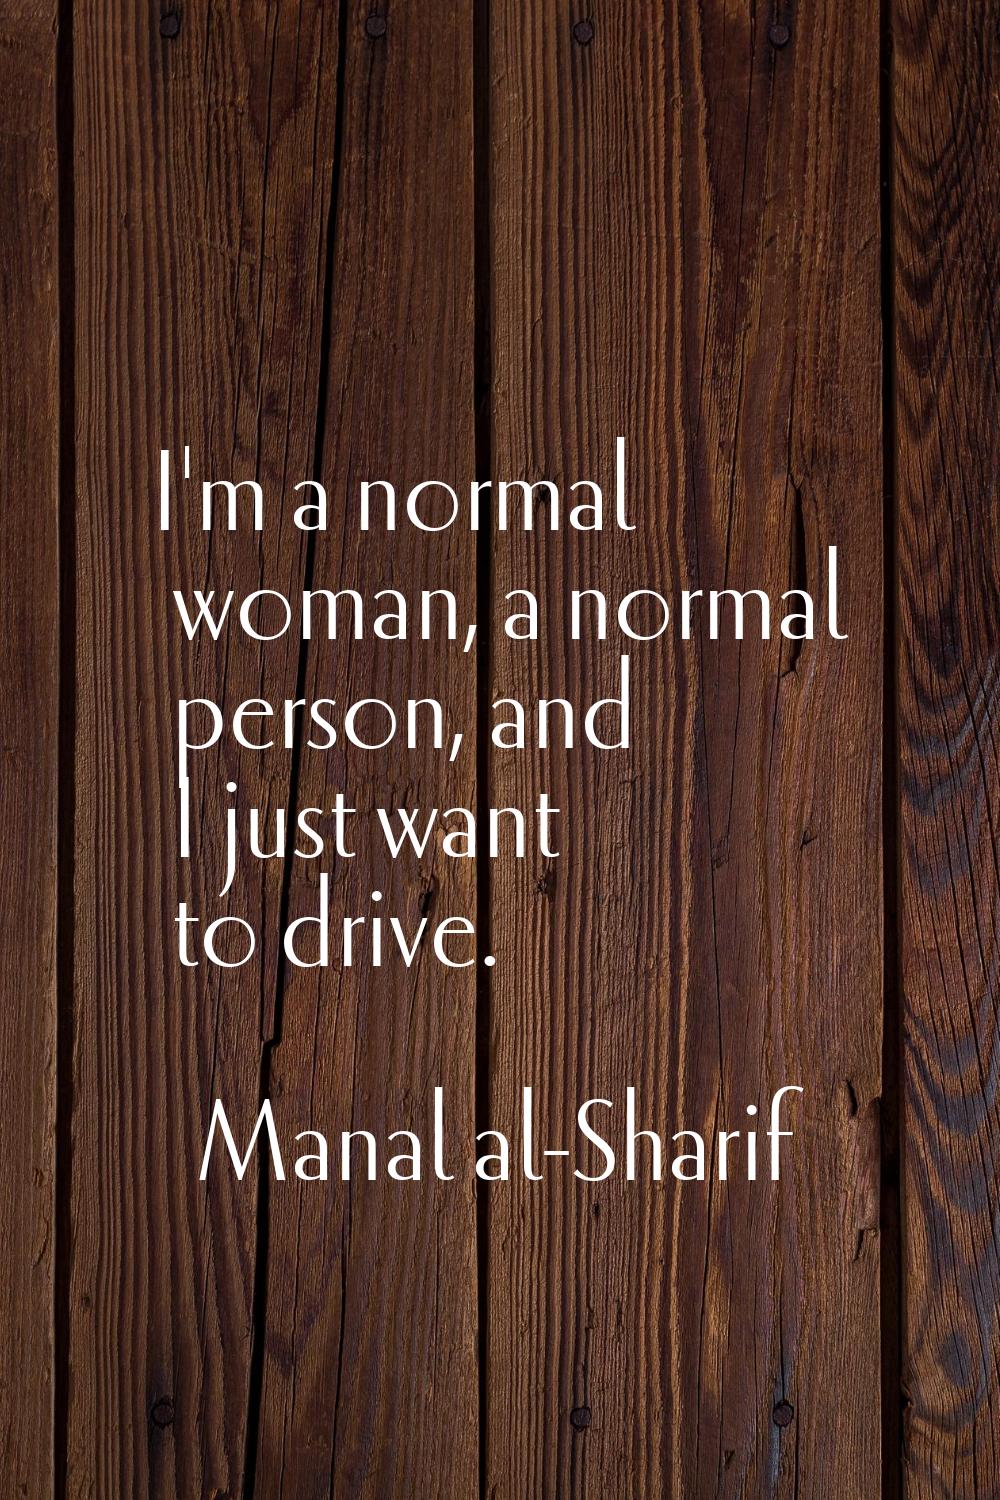 I'm a normal woman, a normal person, and I just want to drive.